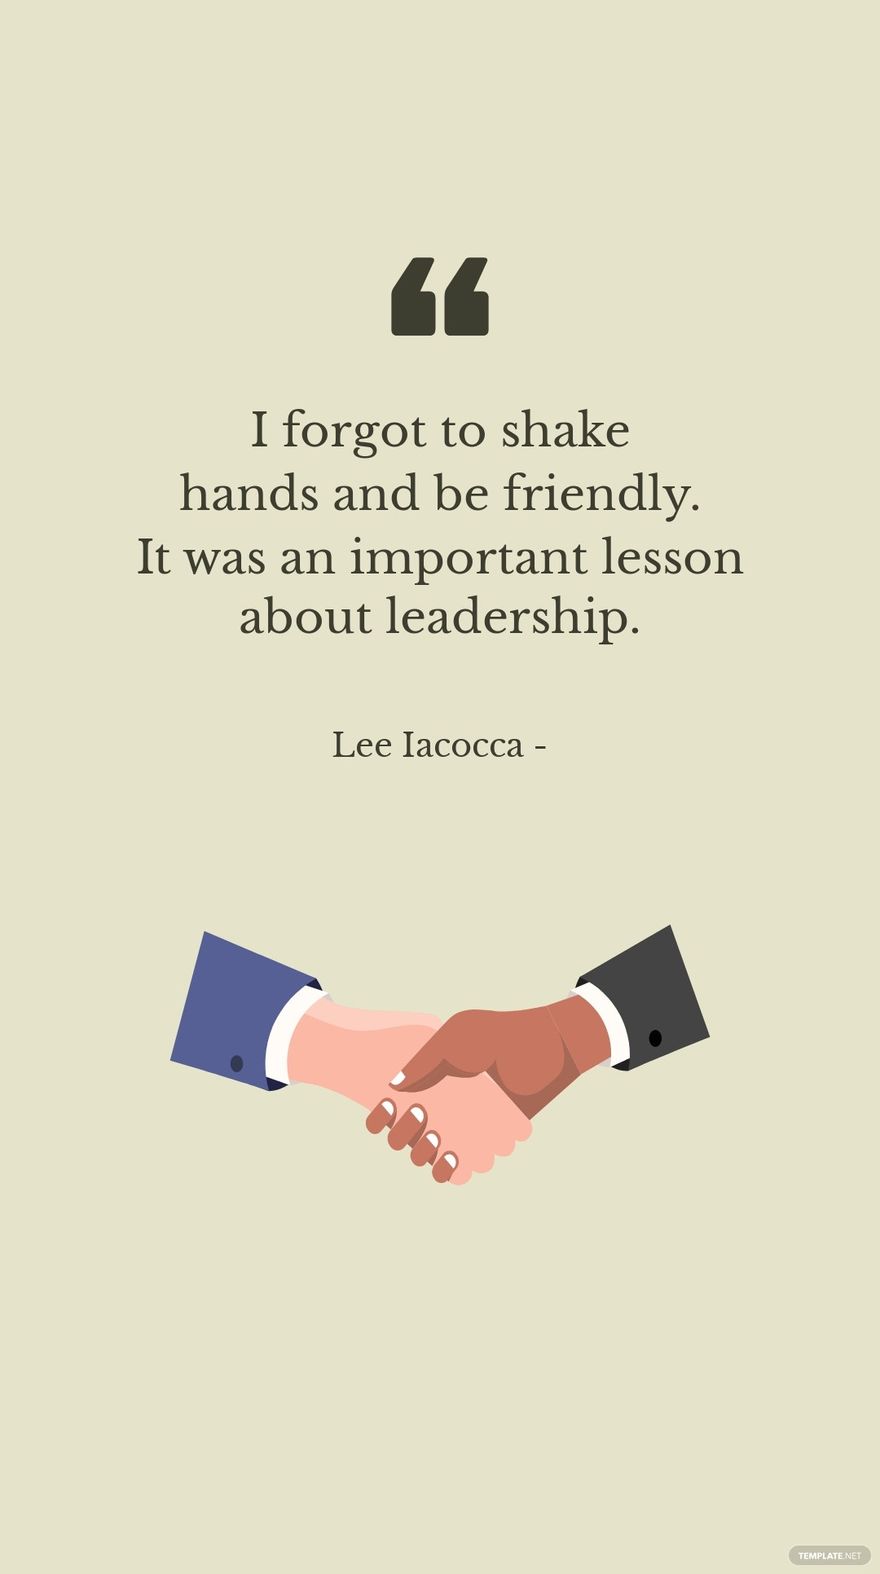 Lee Iacocca - I forgot to shake hands and be friendly. It was an important lesson about leadership. in JPG